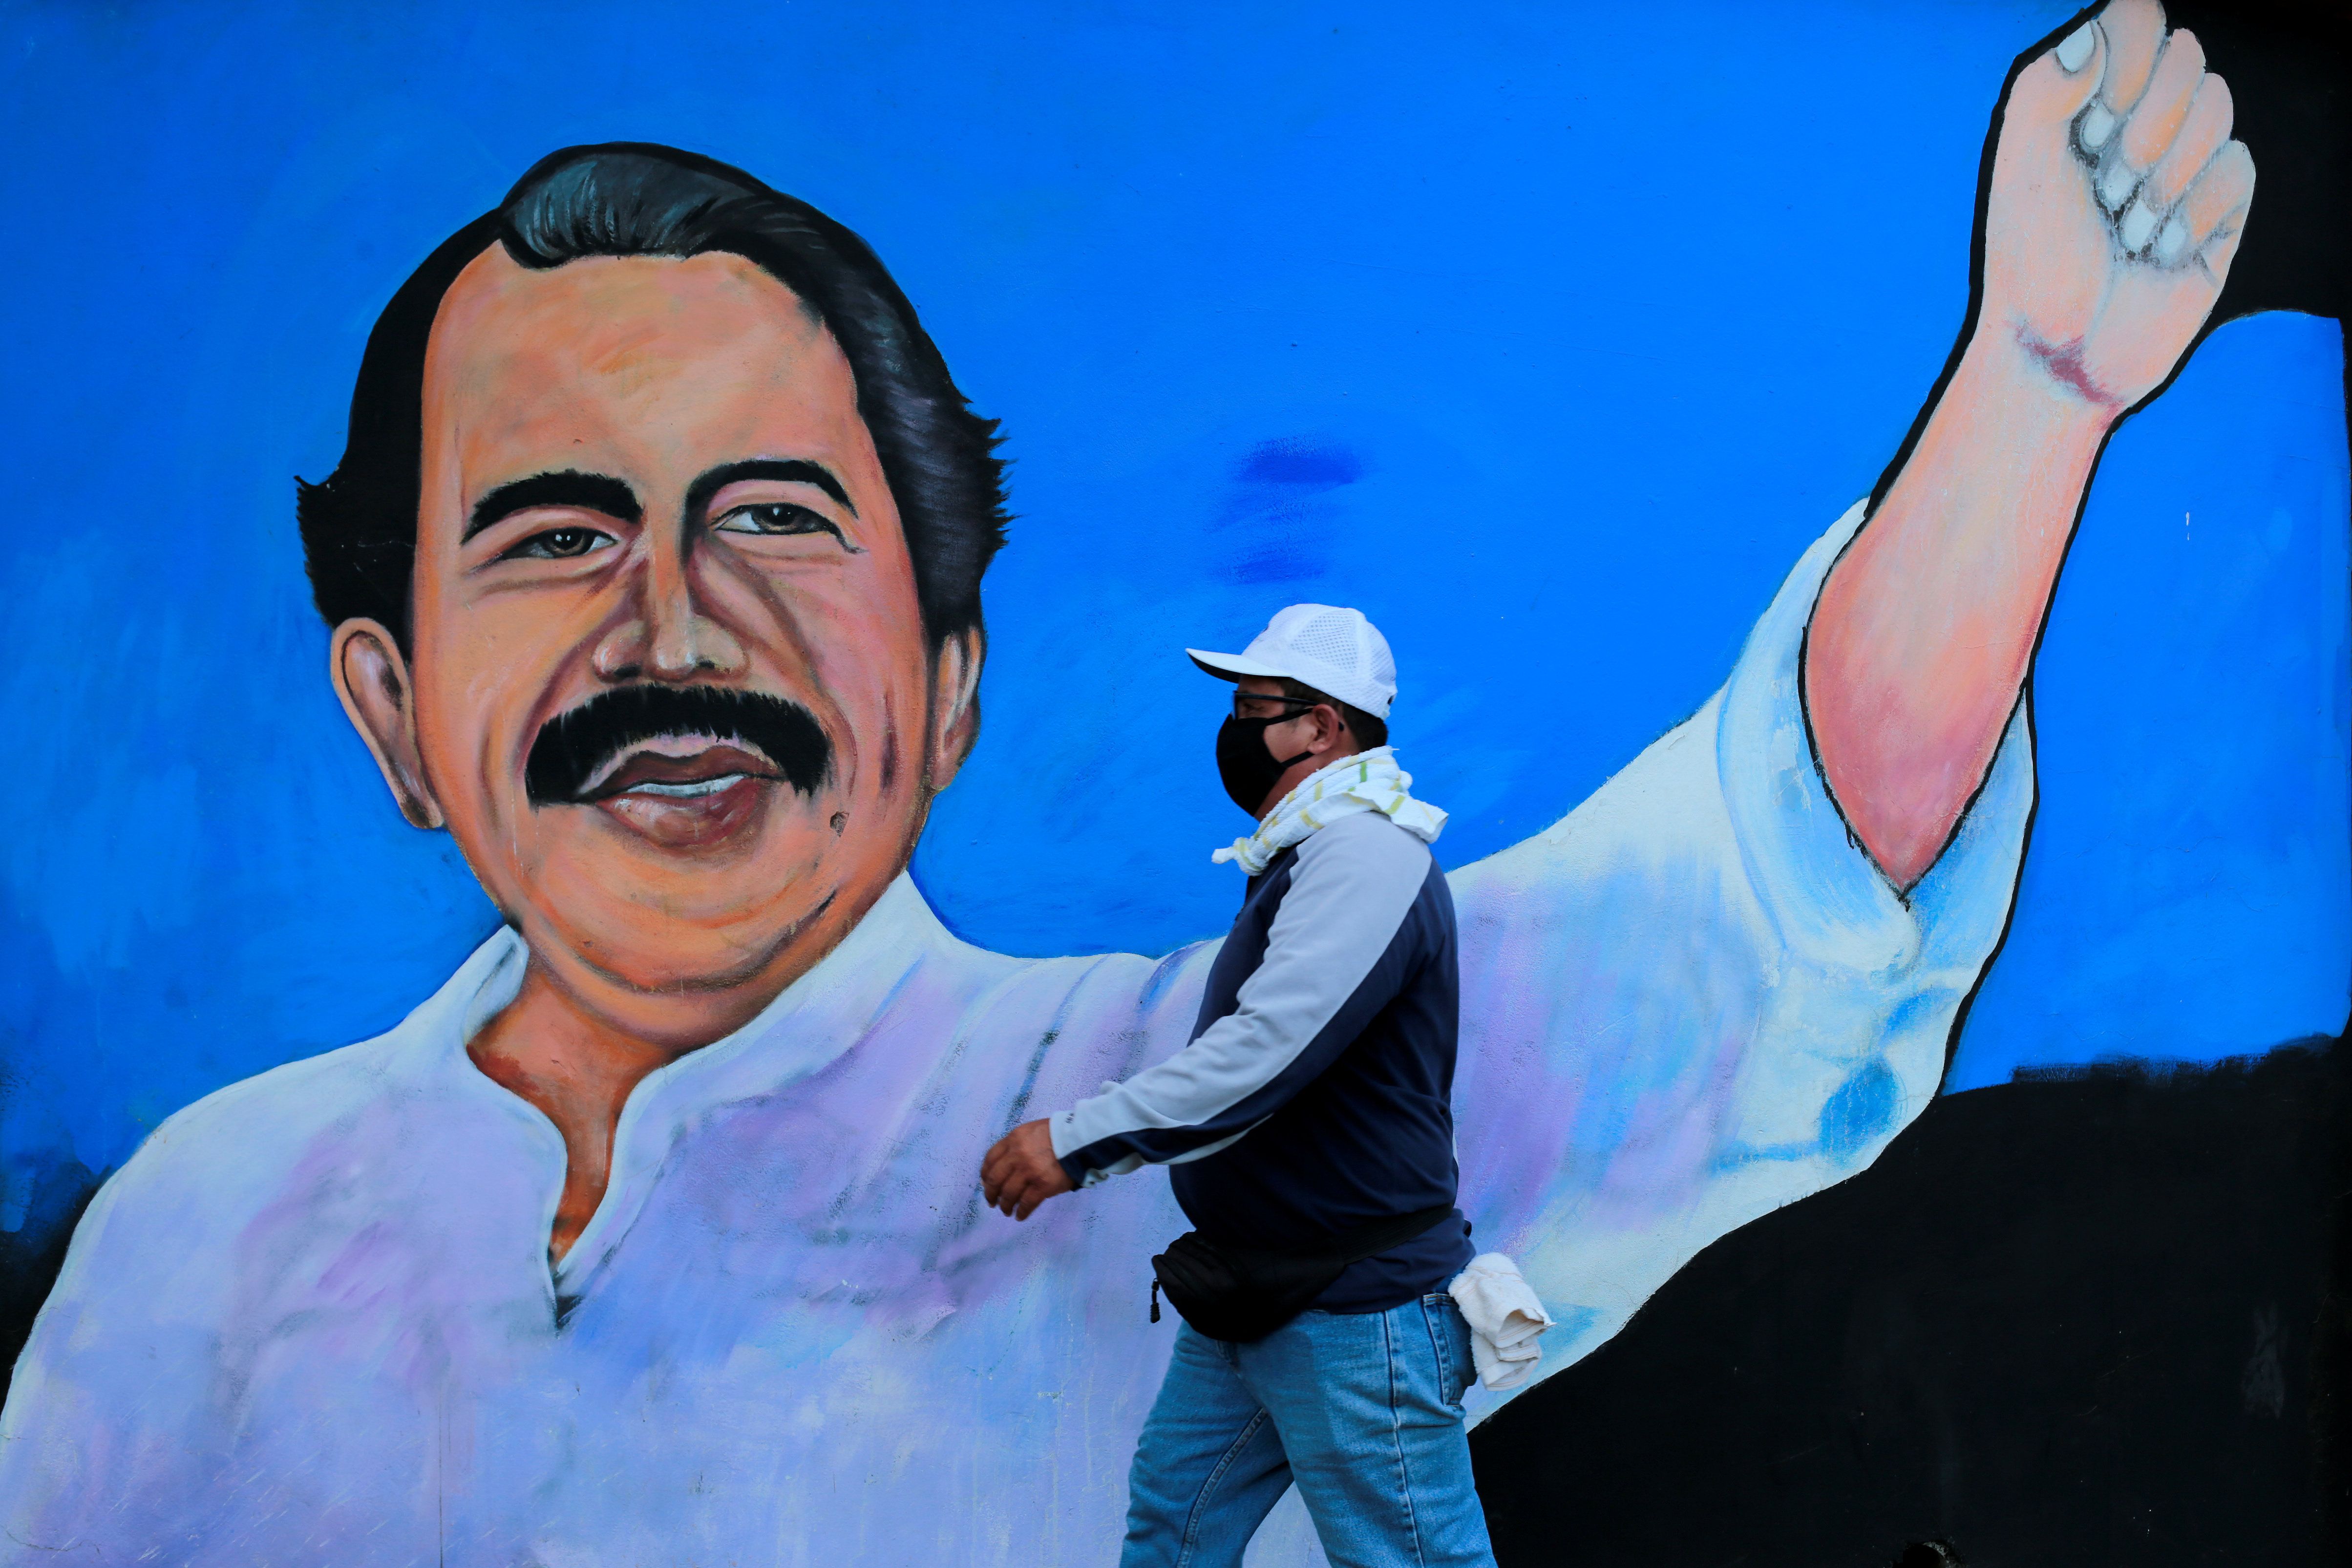 A man wearing a face mask to protect himself from COVID-19 walks in front of a mural depicting Nicaraguan President Daniel Ortega in Managua. Reuters